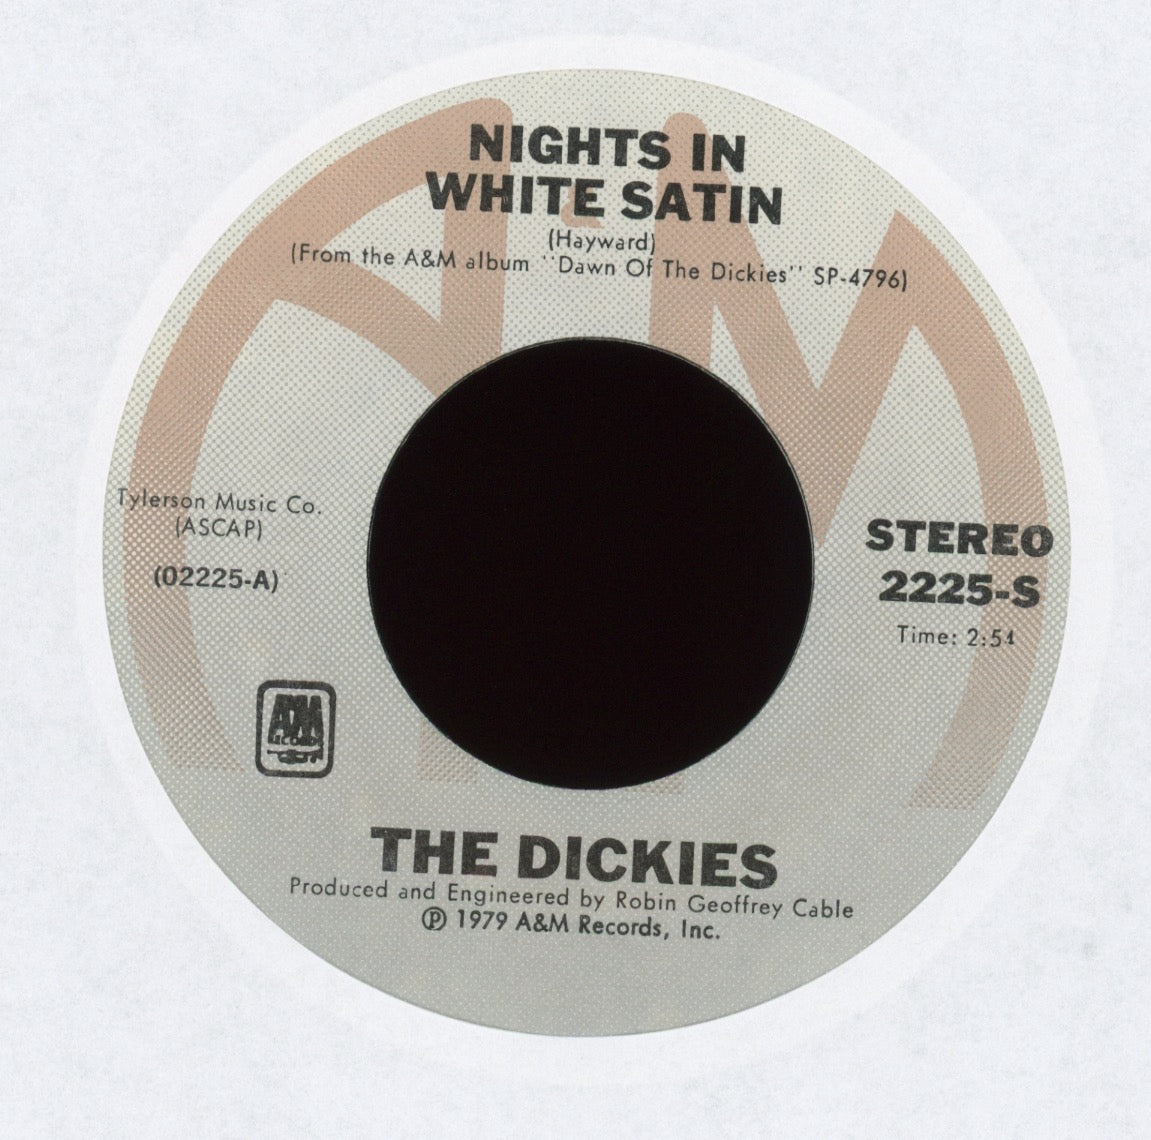 The Dickies - Nights In White Satin on A&M With KKK Picture Sleeve